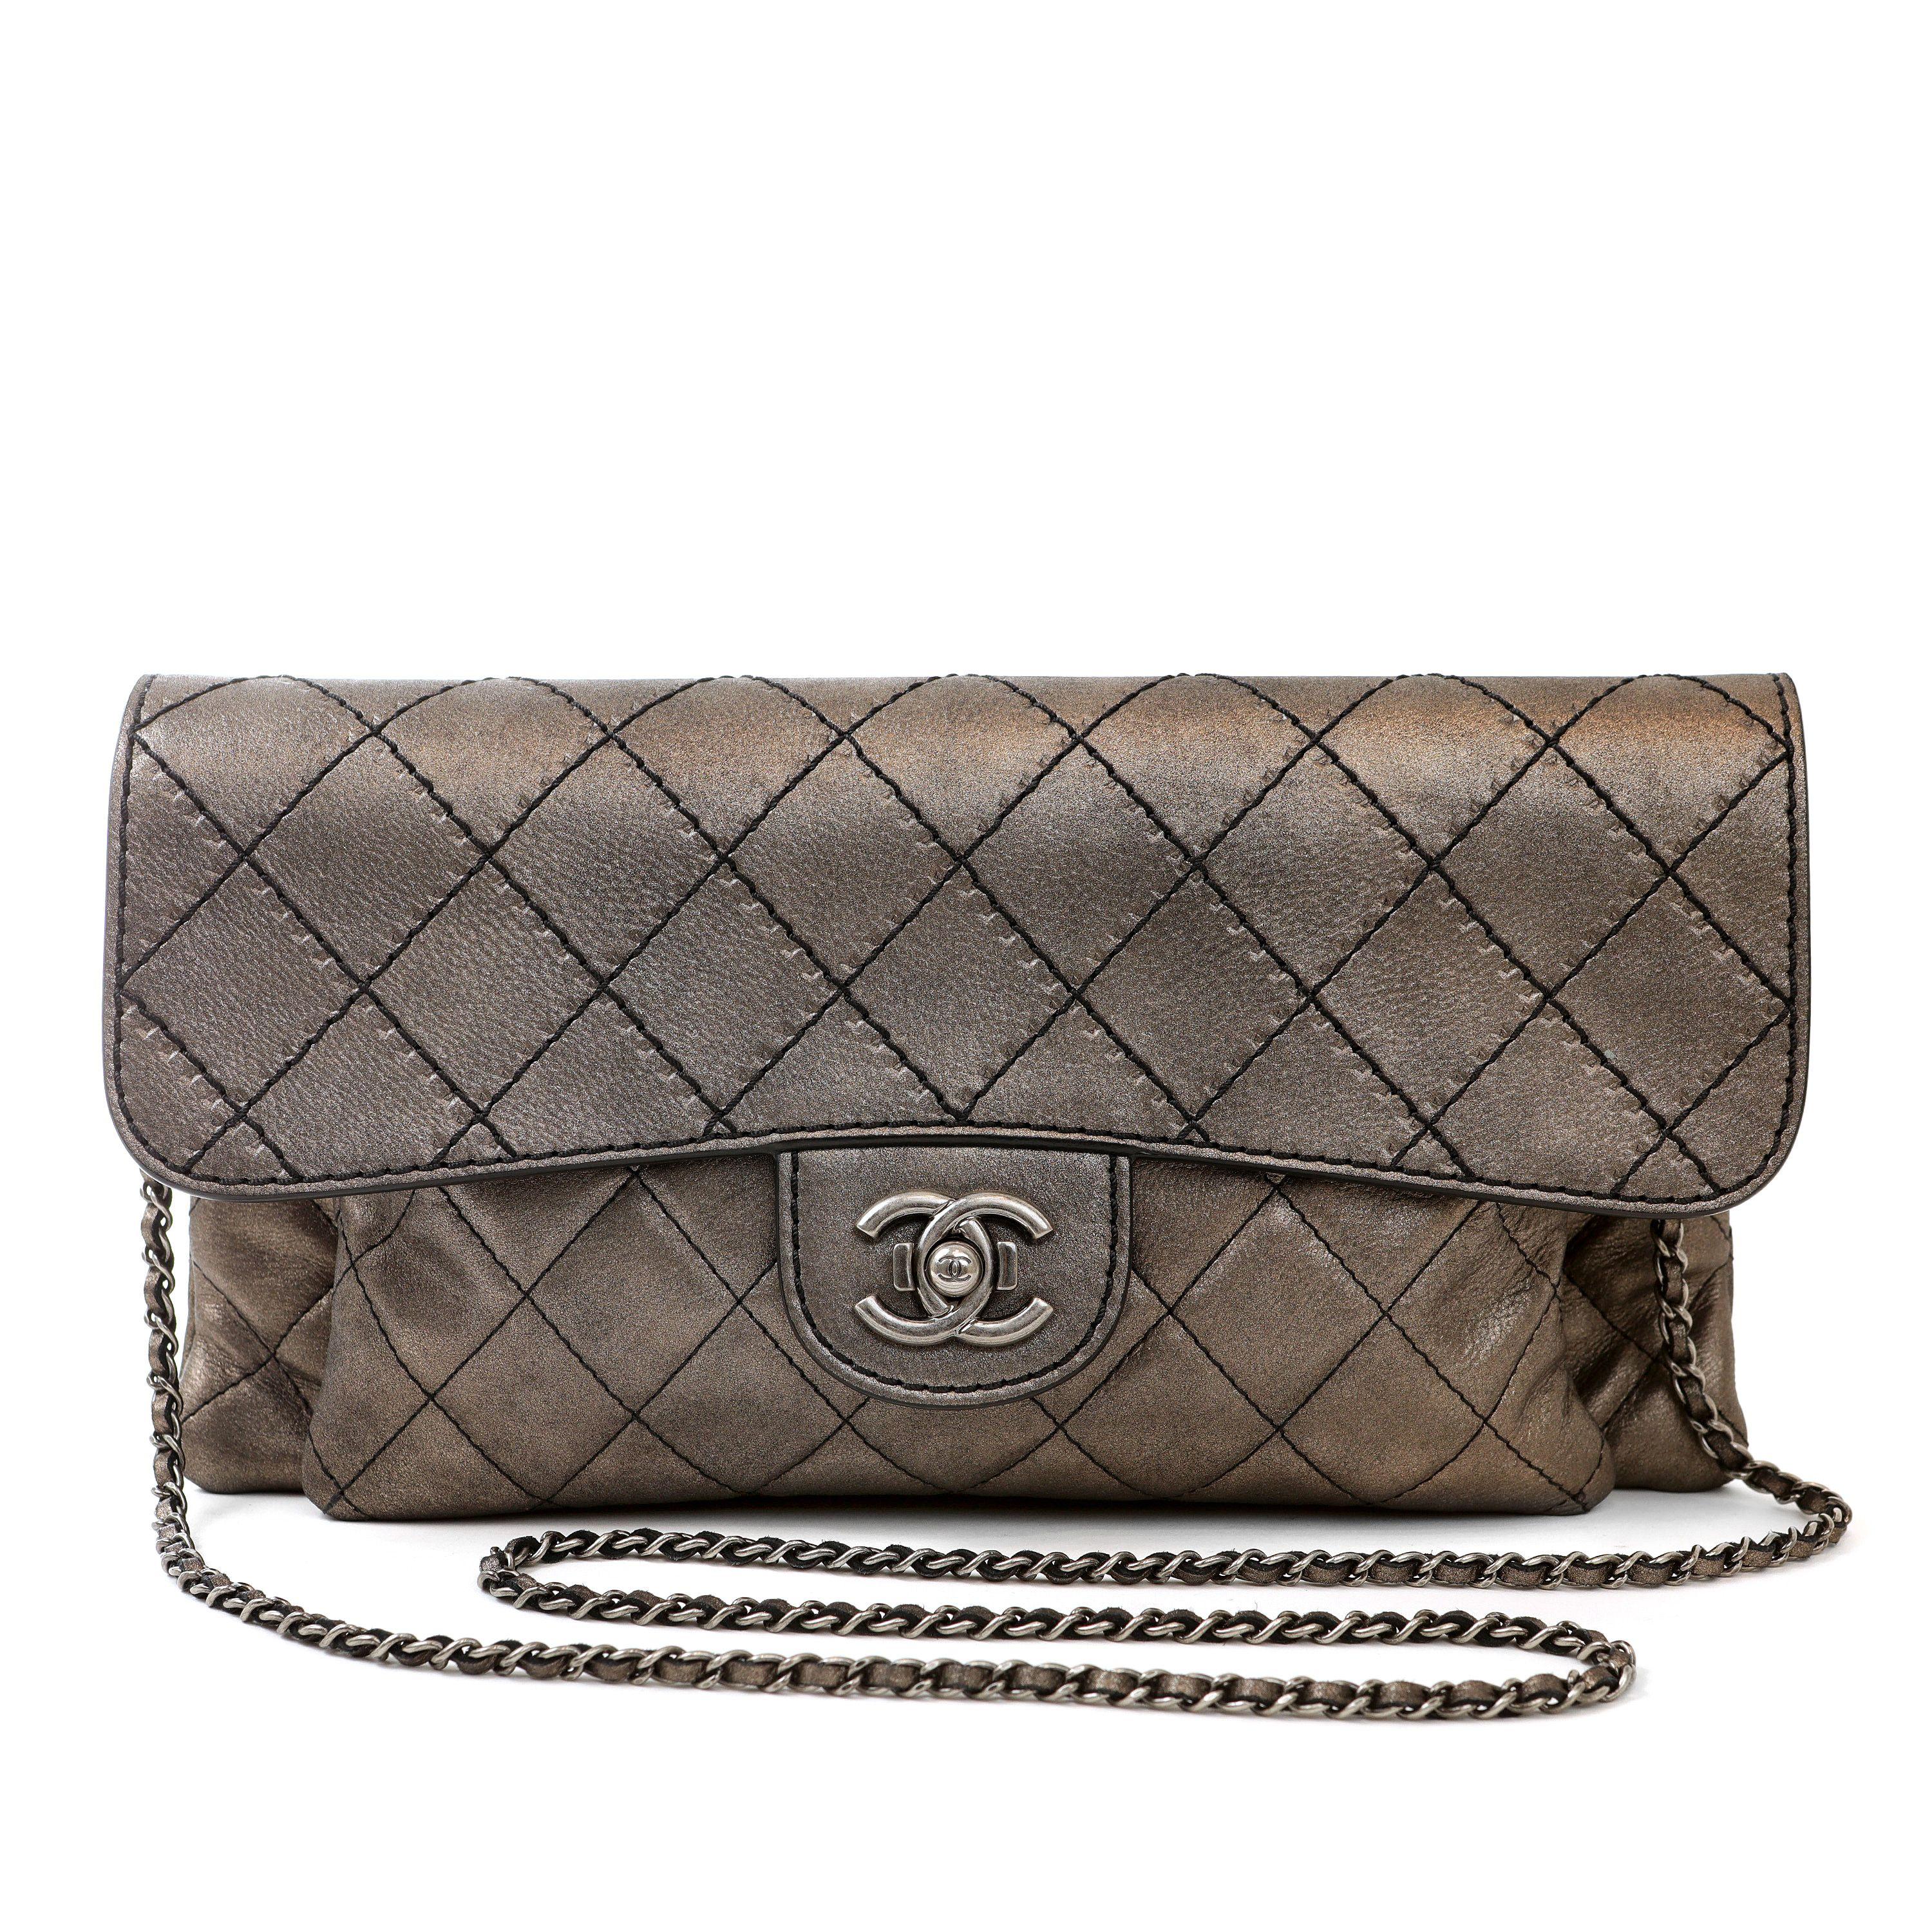 Chanel Metallic Copper Lambskin Small Crossbody Flap Bag with Ruthenium Hardware In Good Condition For Sale In Palm Beach, FL